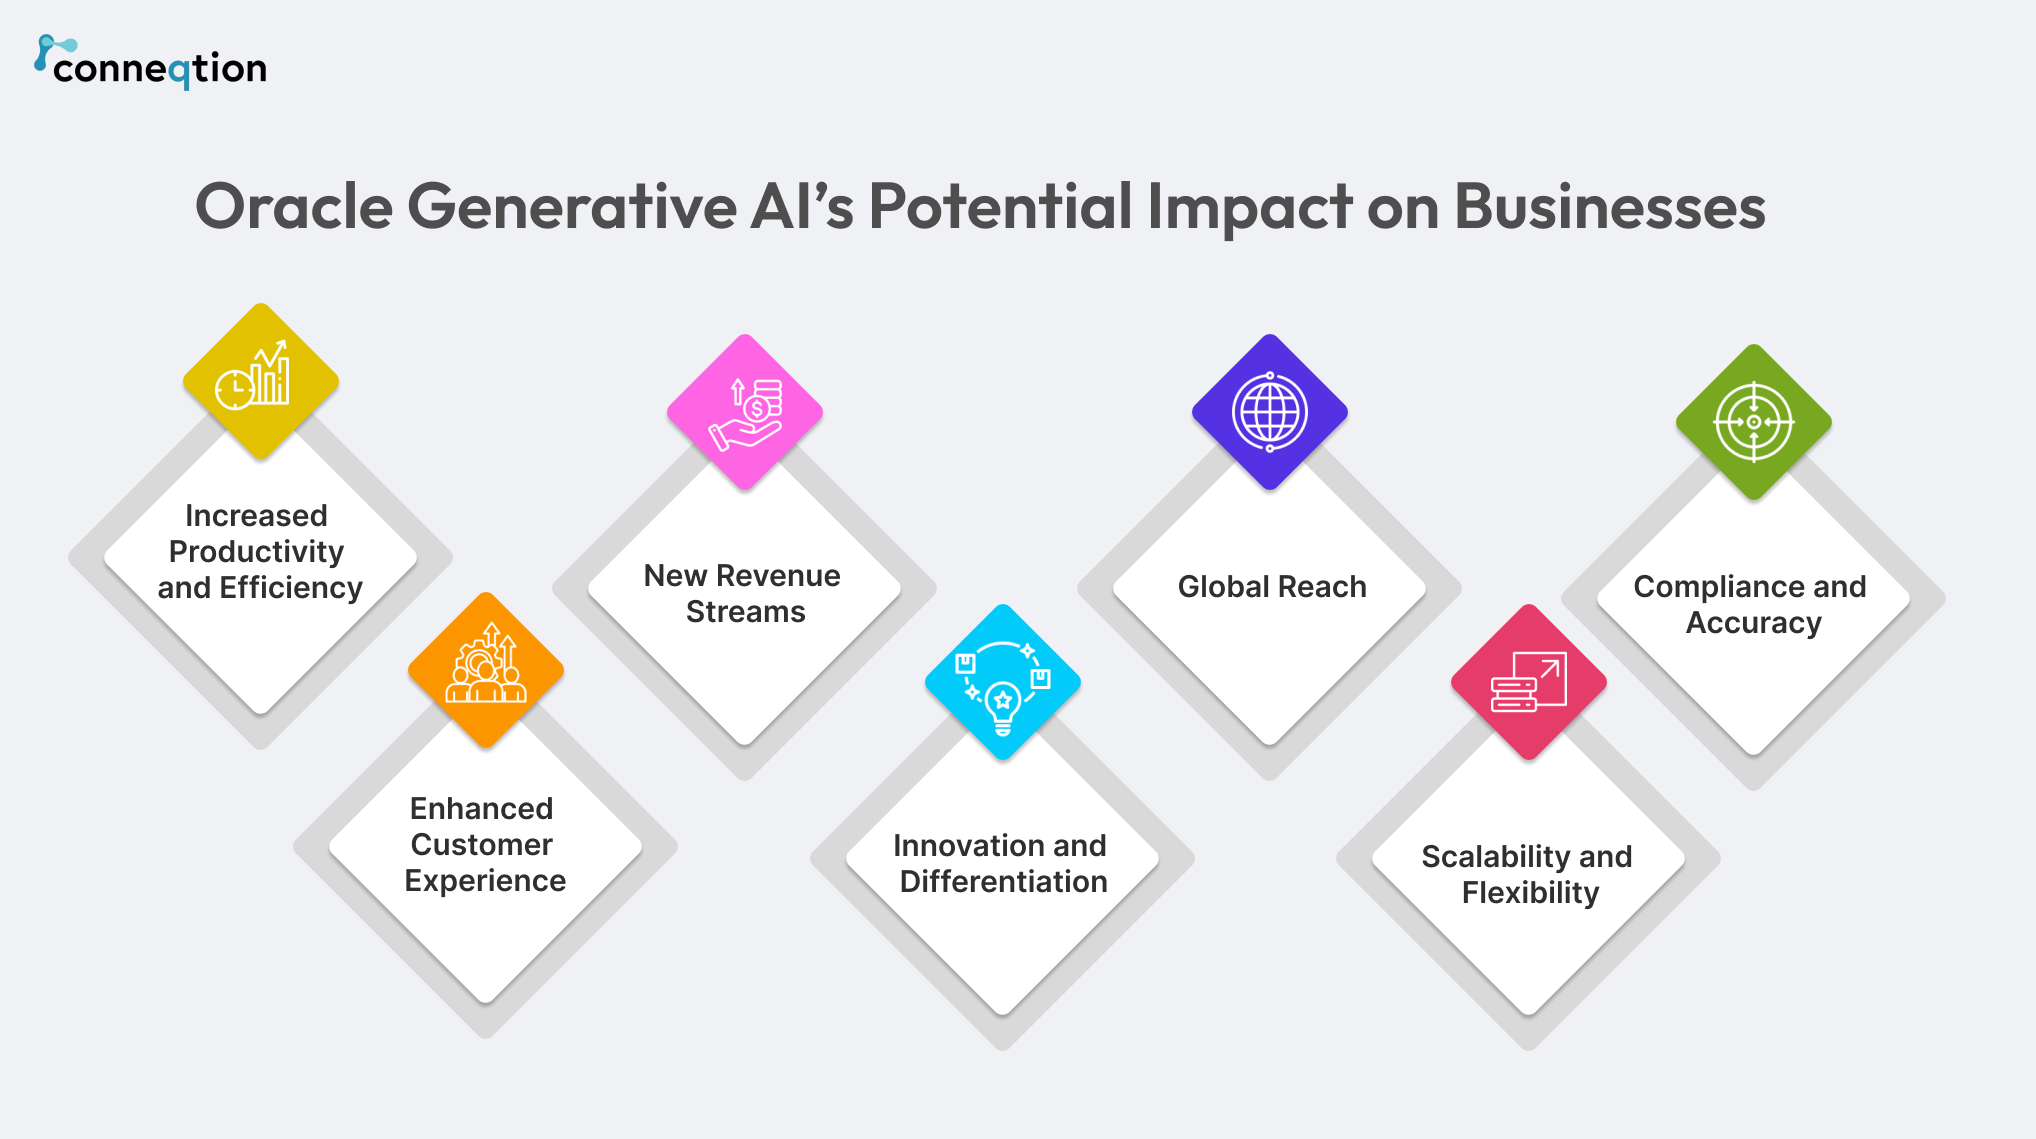 How can Oracle’s Generative AI Drive Transformational Growth for your Business?